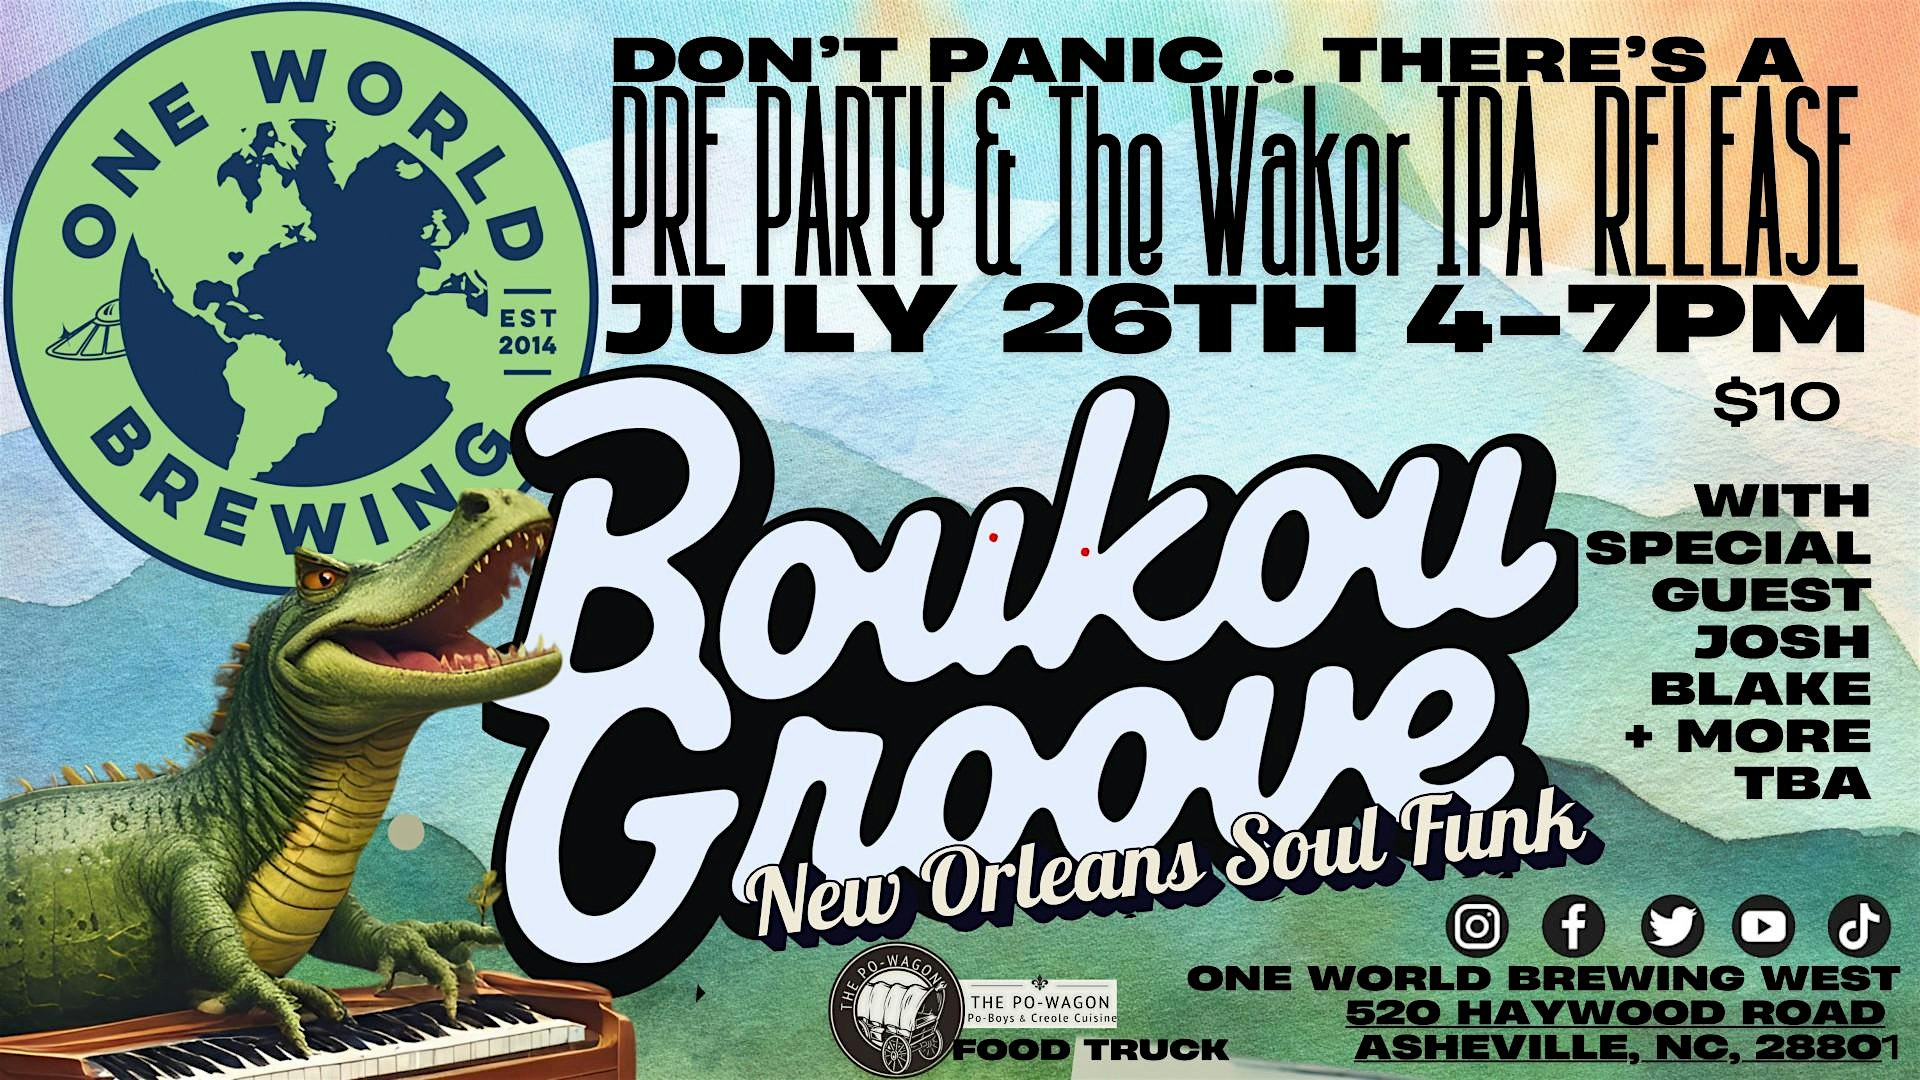 Boukou Groove w\/ Special Guest Josh Blake + More TBA